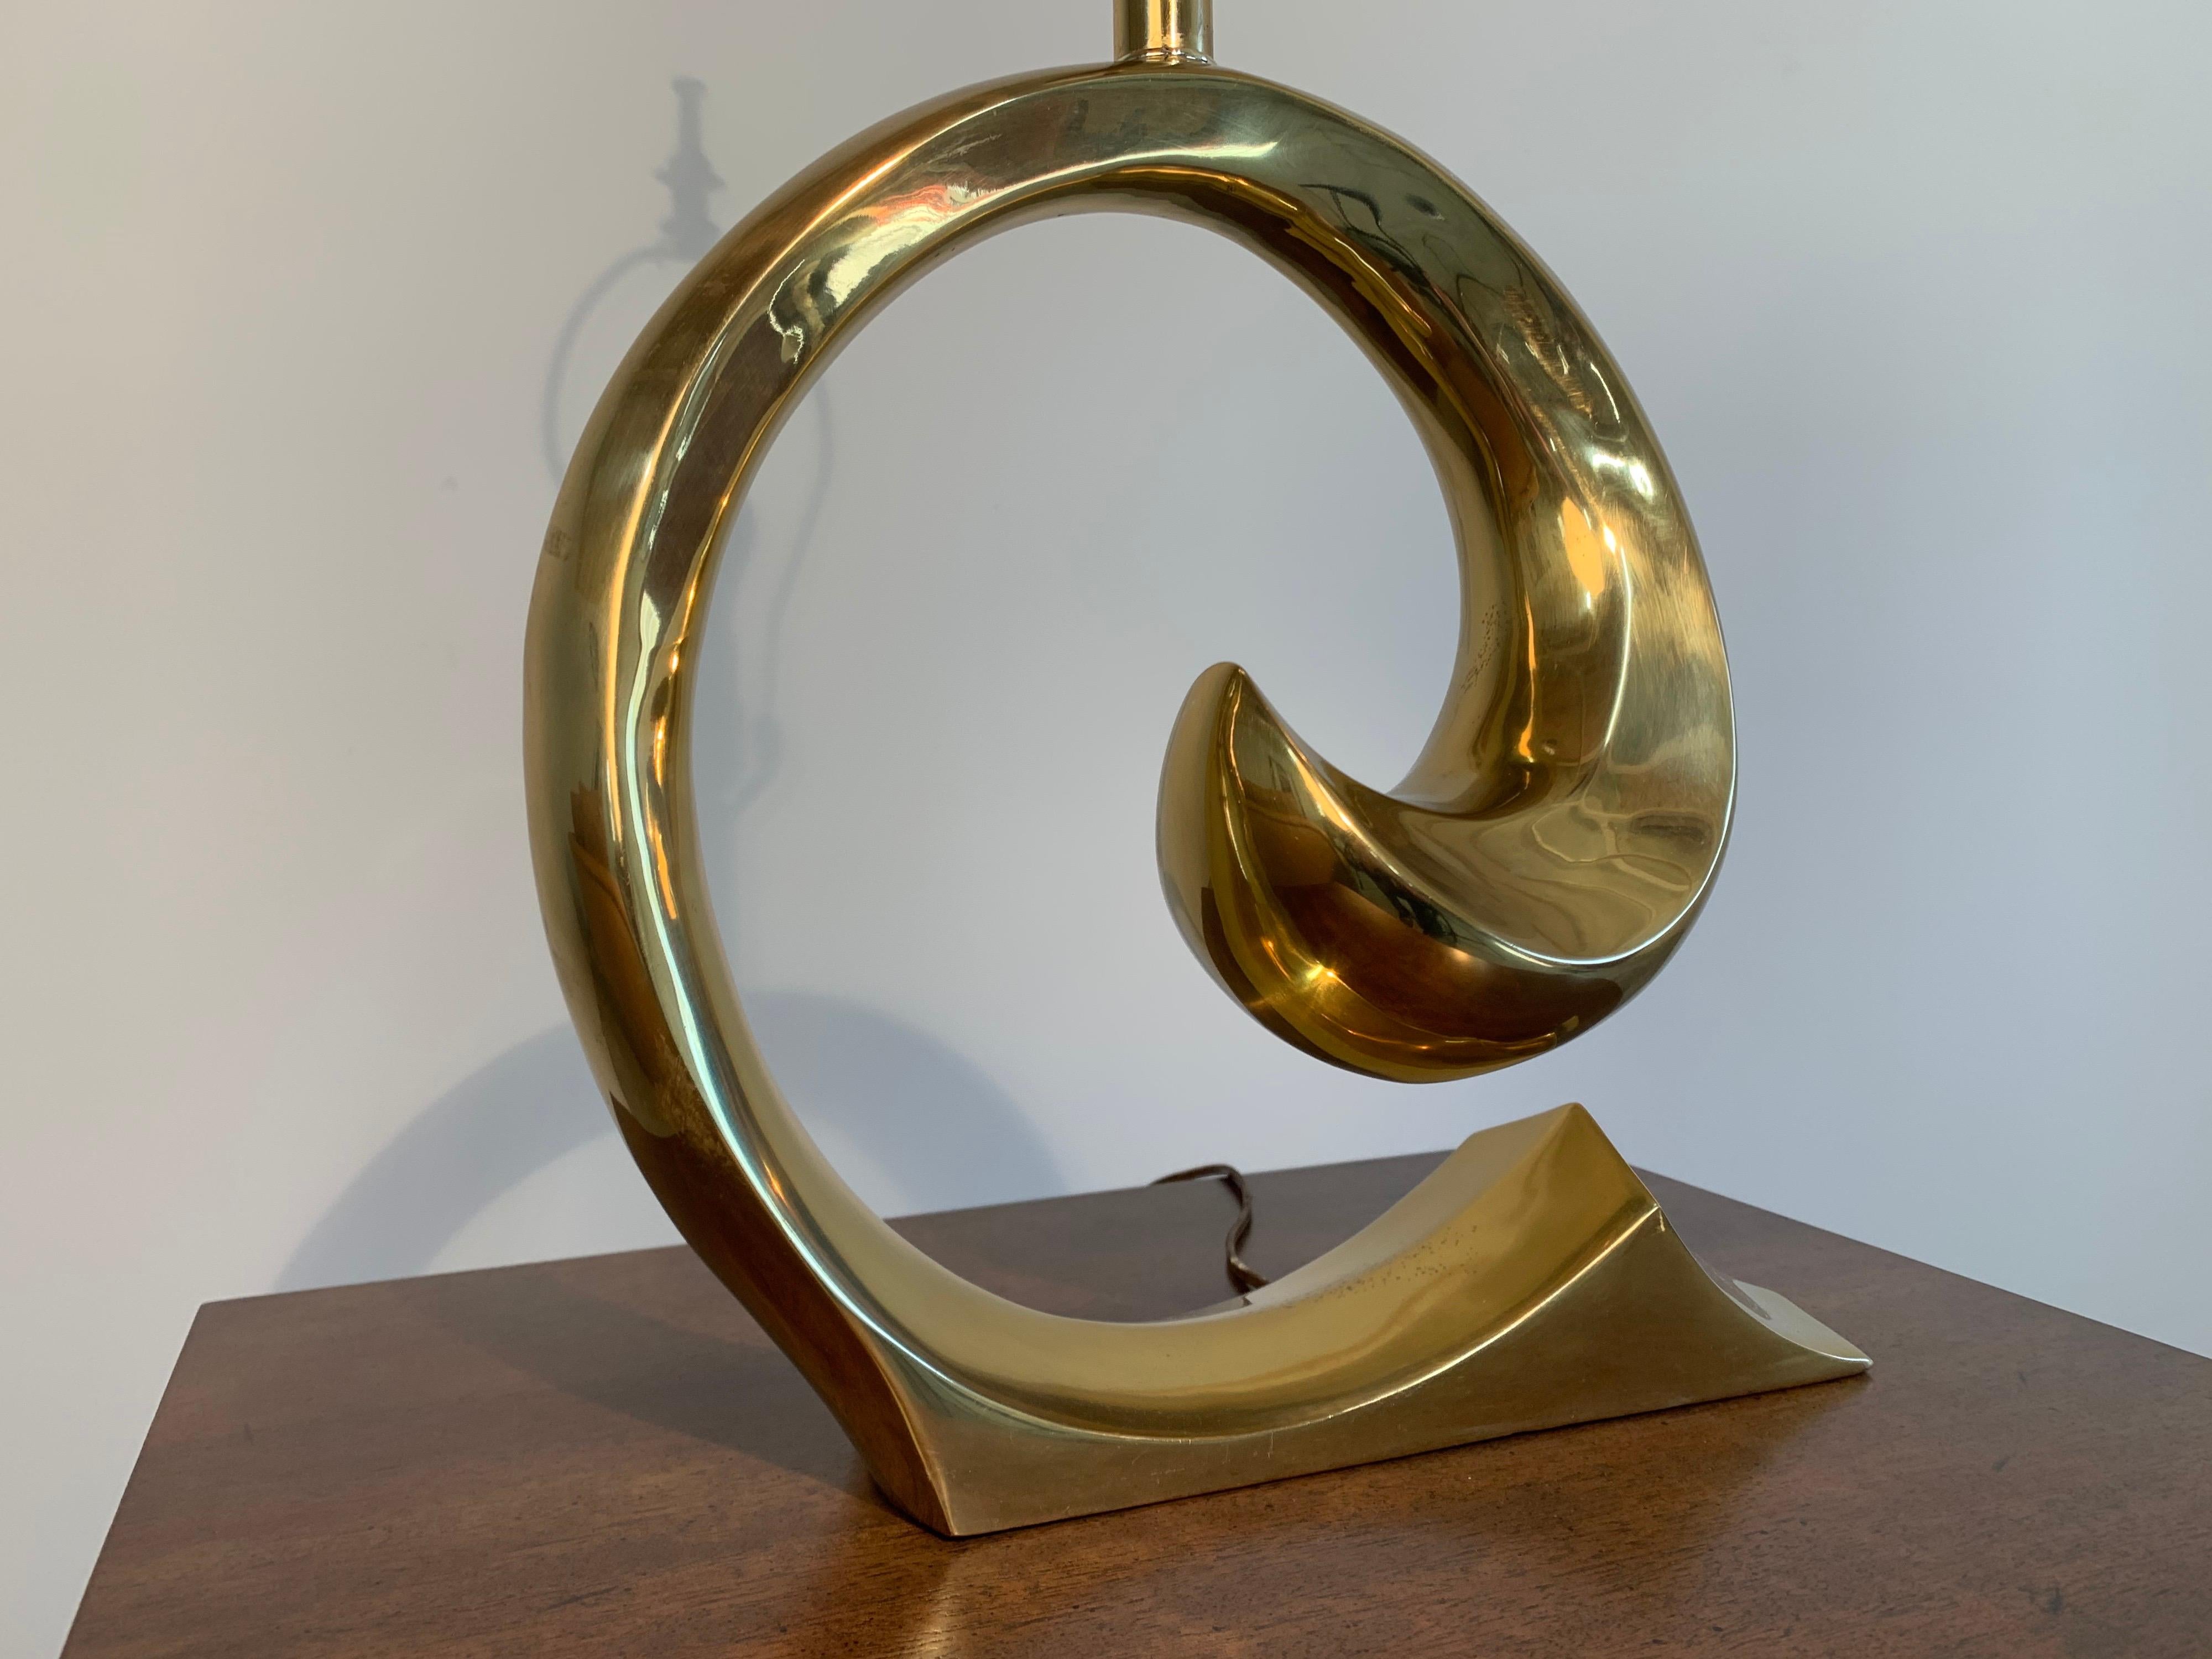 Vintage Pierre Cardin “Swoosh” table lamp having gold tone finish.
Beautiful condition having been freshly polished. Wiring is tested as functional and safe.